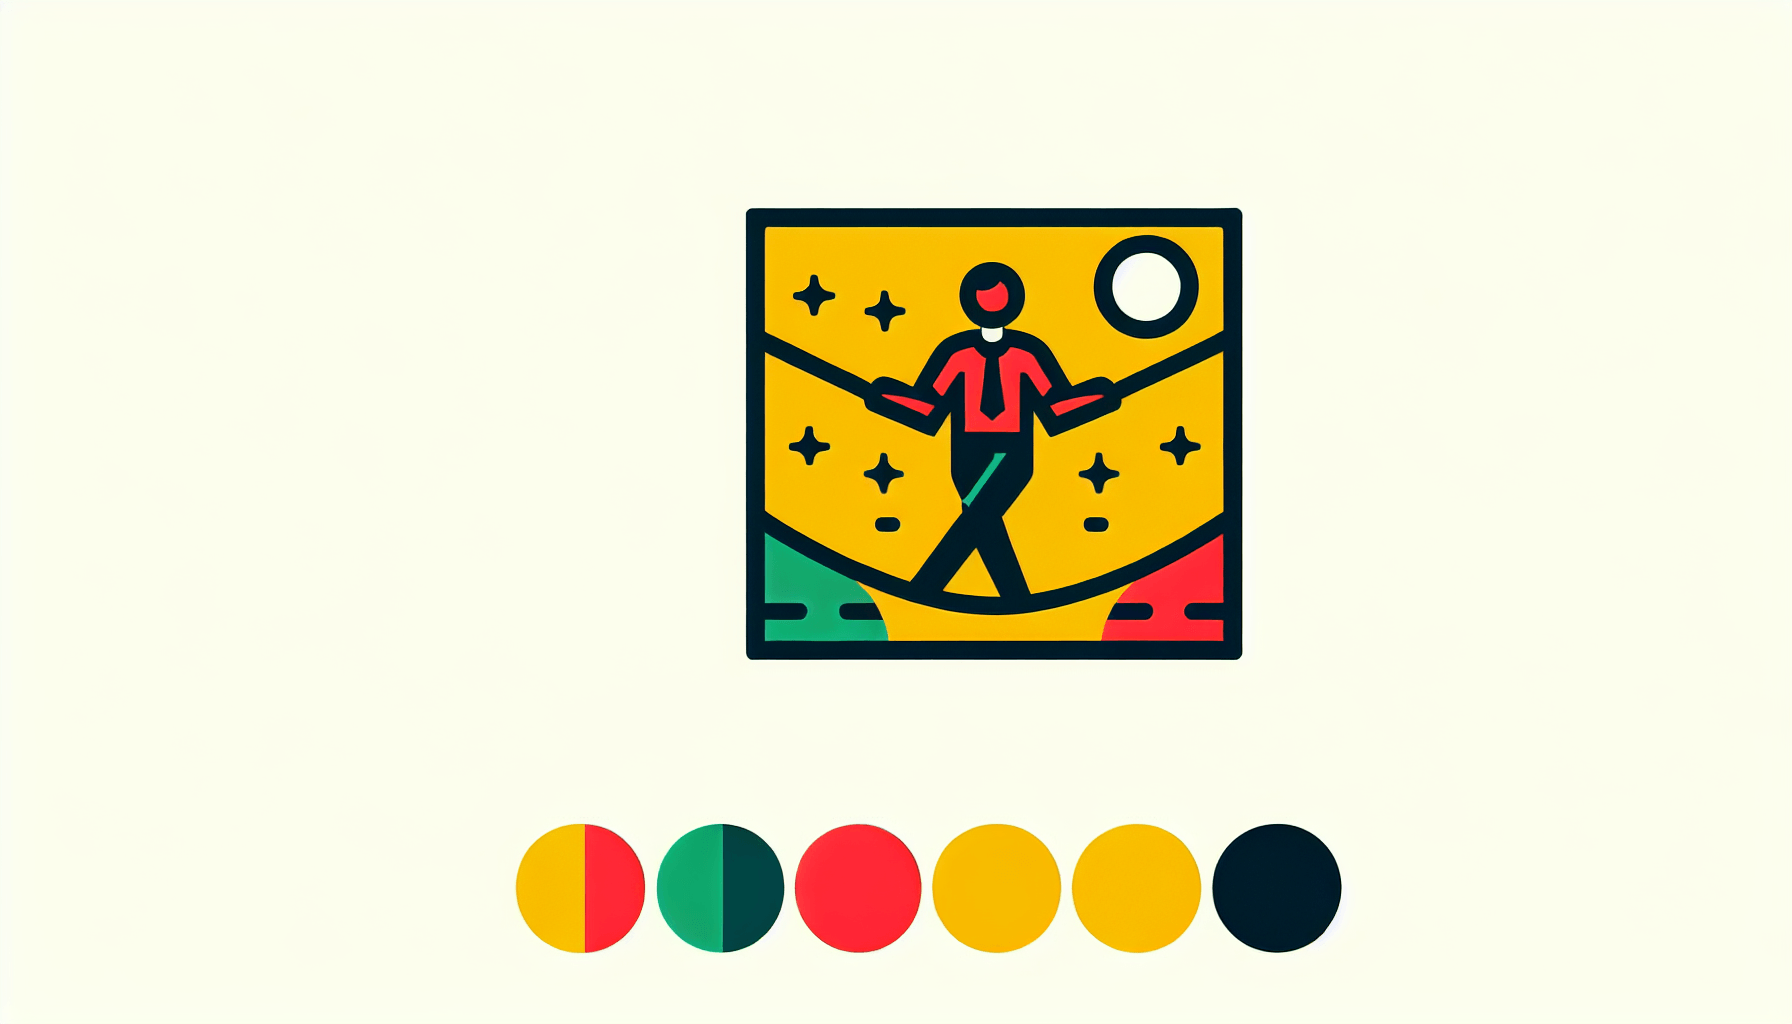 Tightrope in flat illustration style and white background, red #f47574, green #88c7a8, yellow #fcc44b, and blue #645bc8 colors.